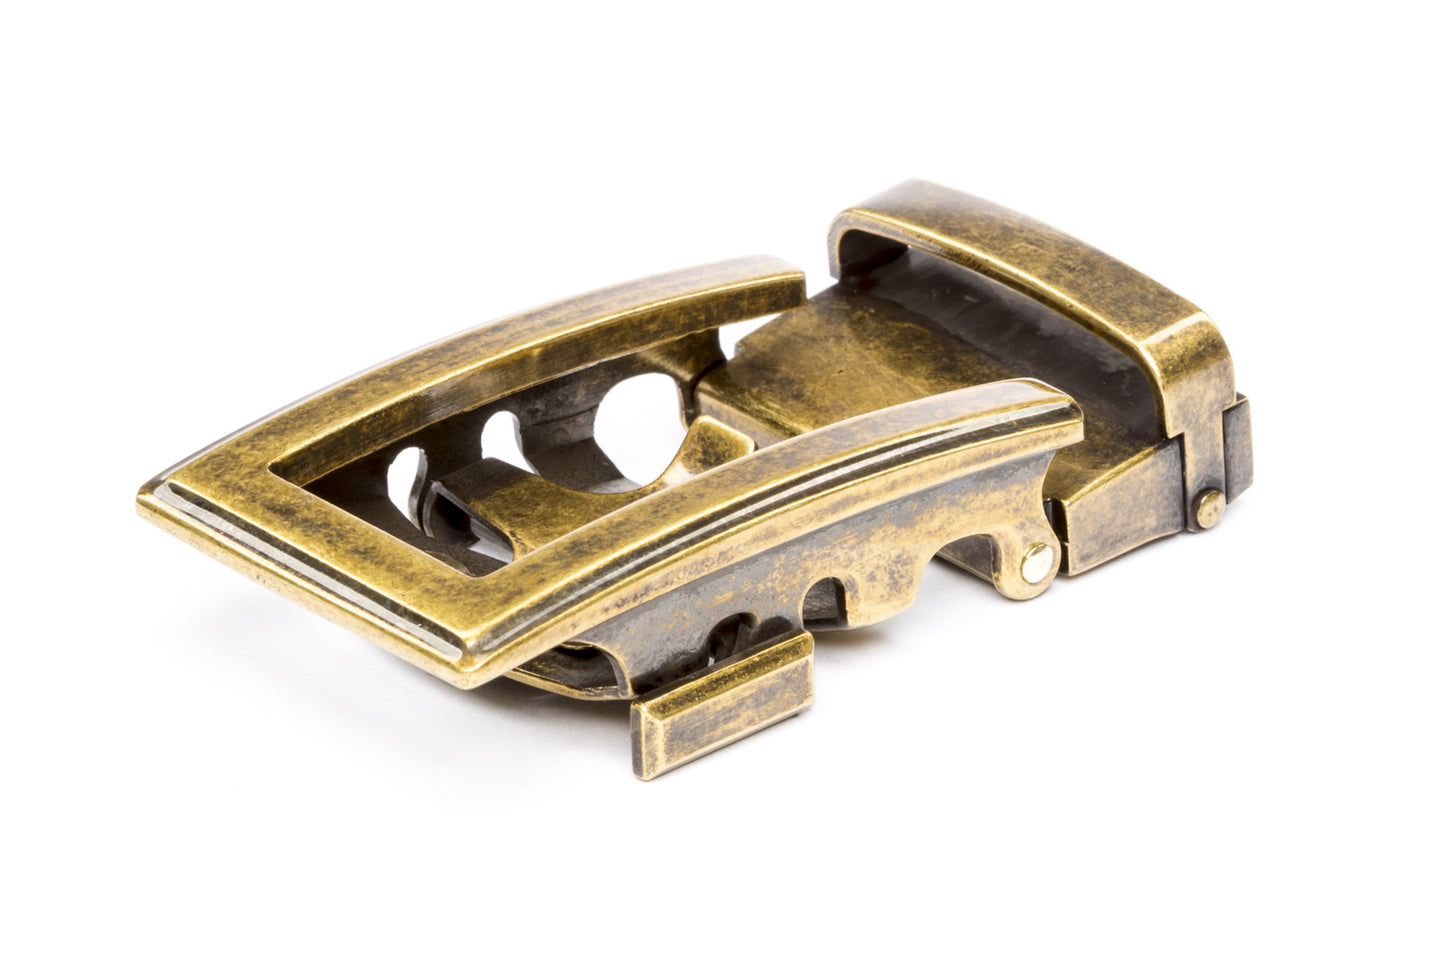 Men's traditional ratchet belt buckle in antiqued gold with a width of 1.5 inches.